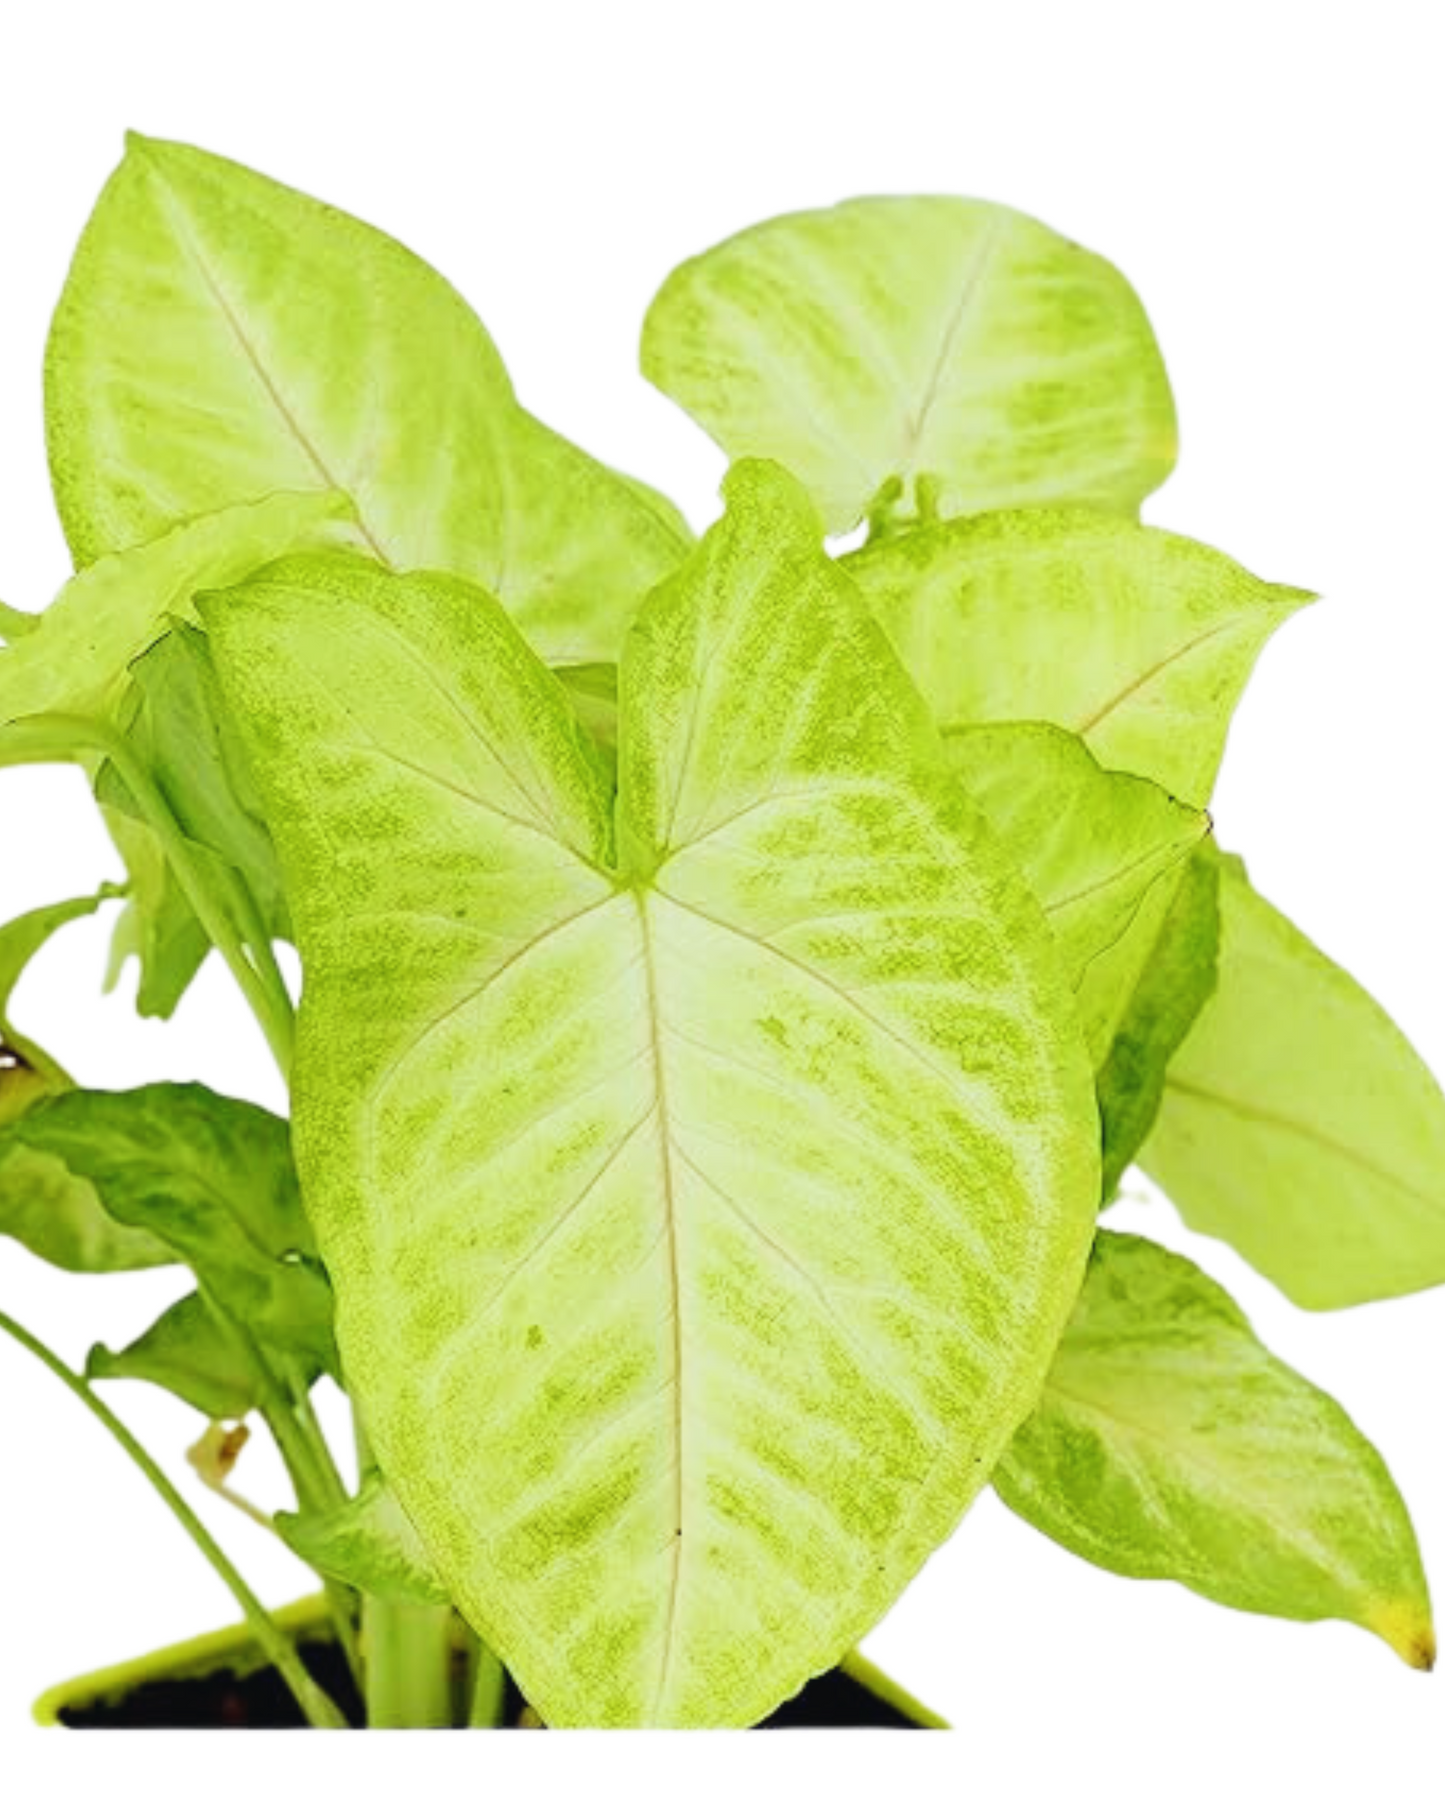 Combo Set of 3 Good Luck Plant (Syngonium, Pothos and  Money Plant)